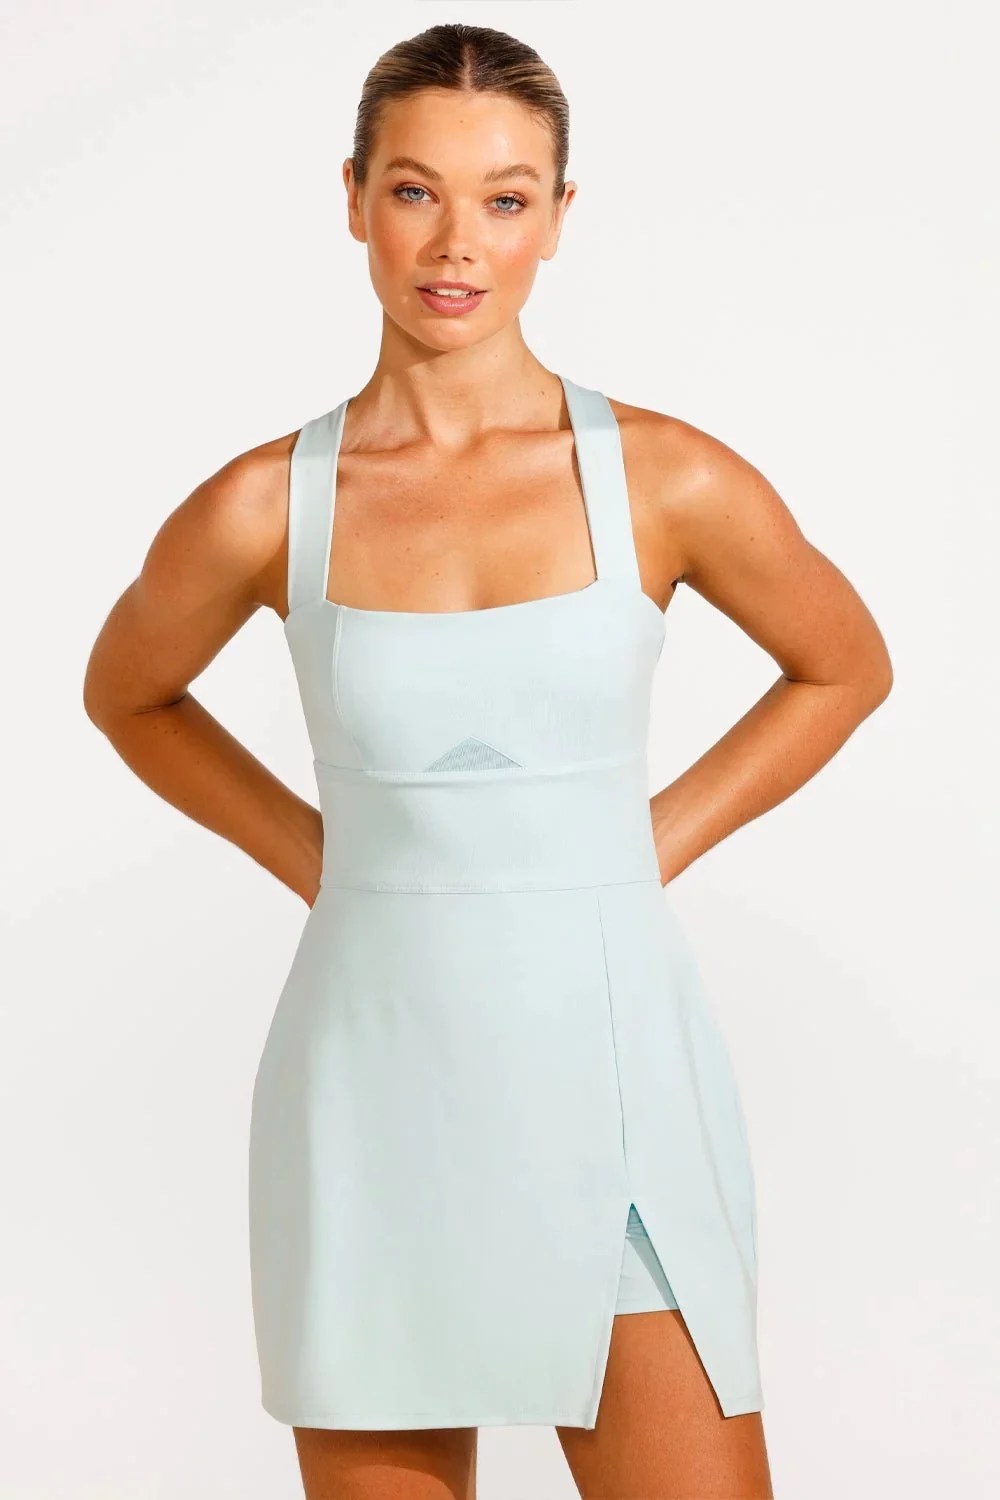 Eleven Ice Queen All In One Tennis Dress